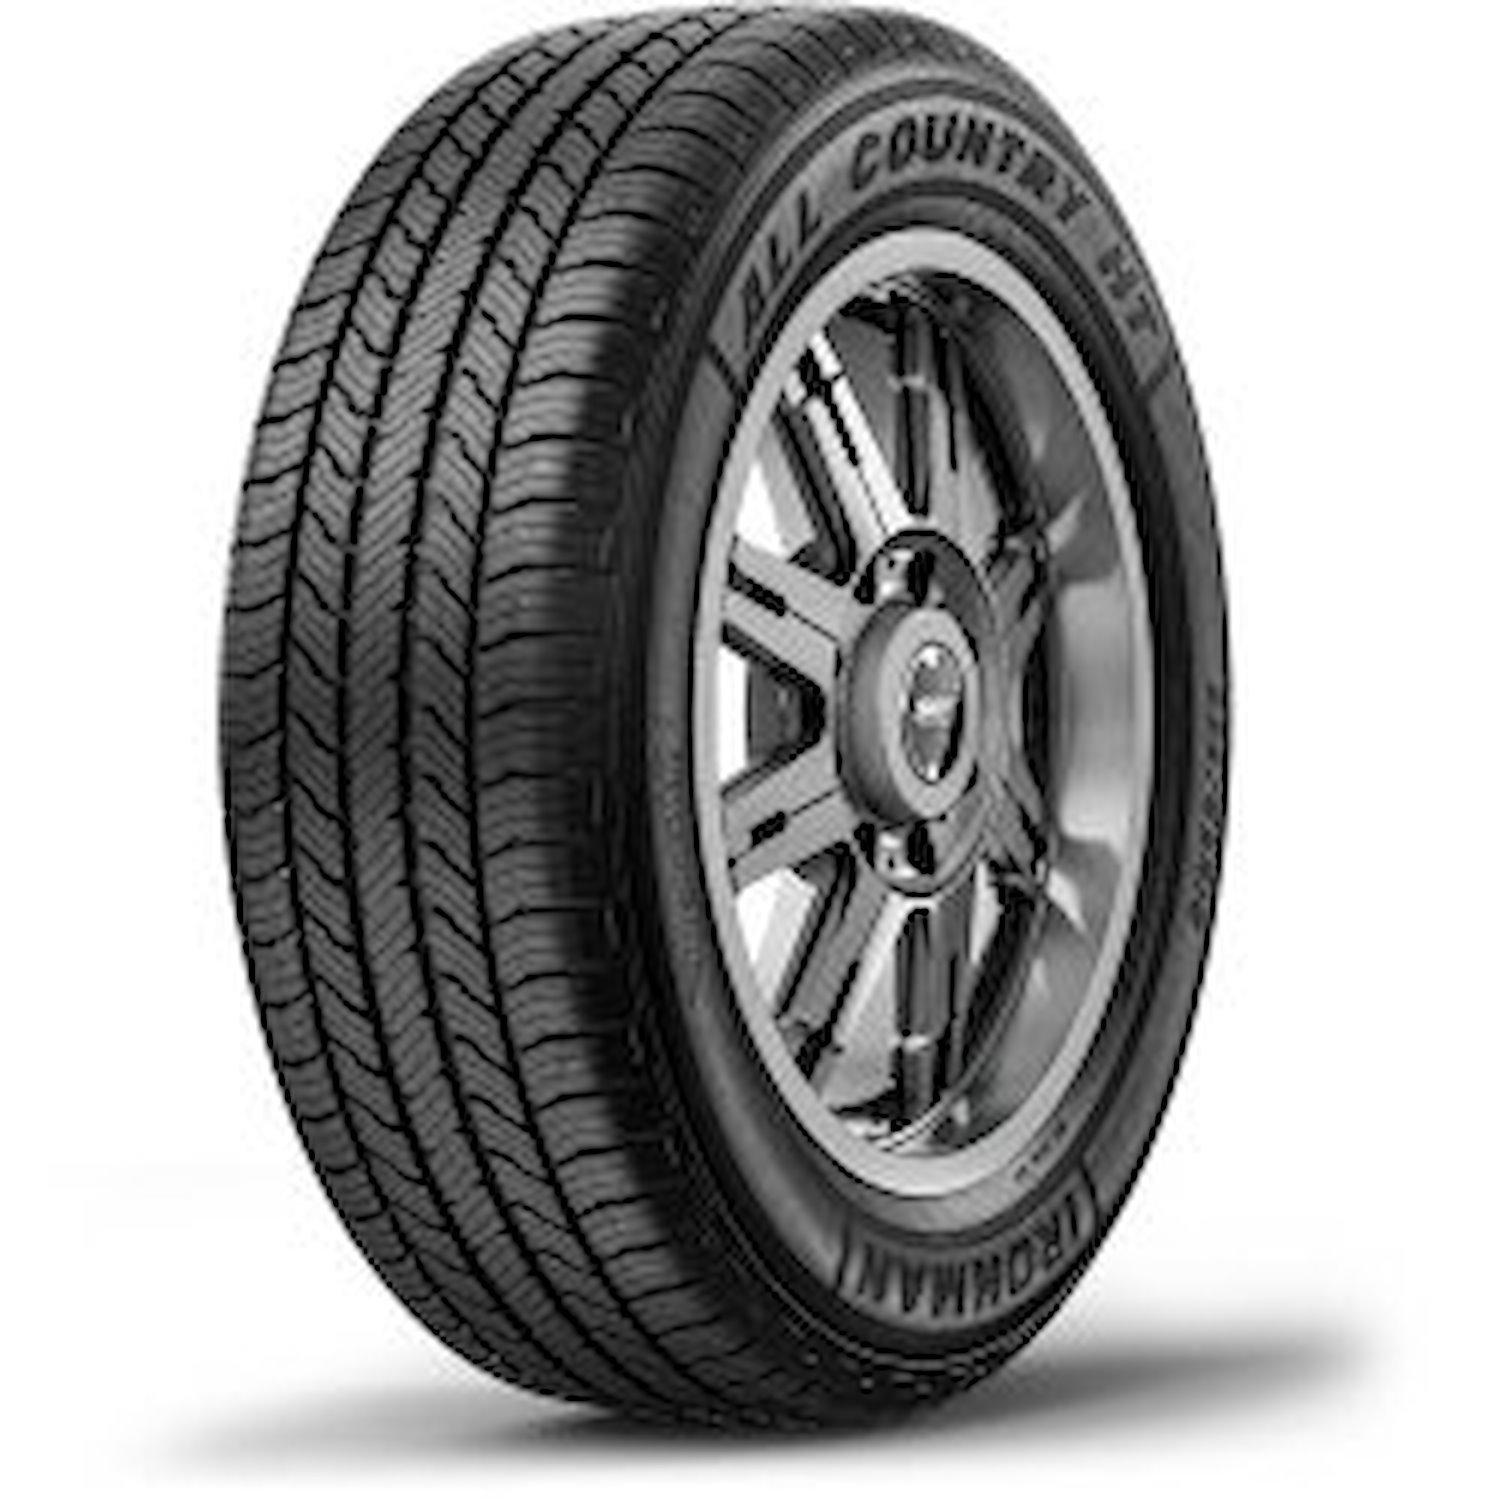 03073 All Country HT Tire, 245/65R17, 107T